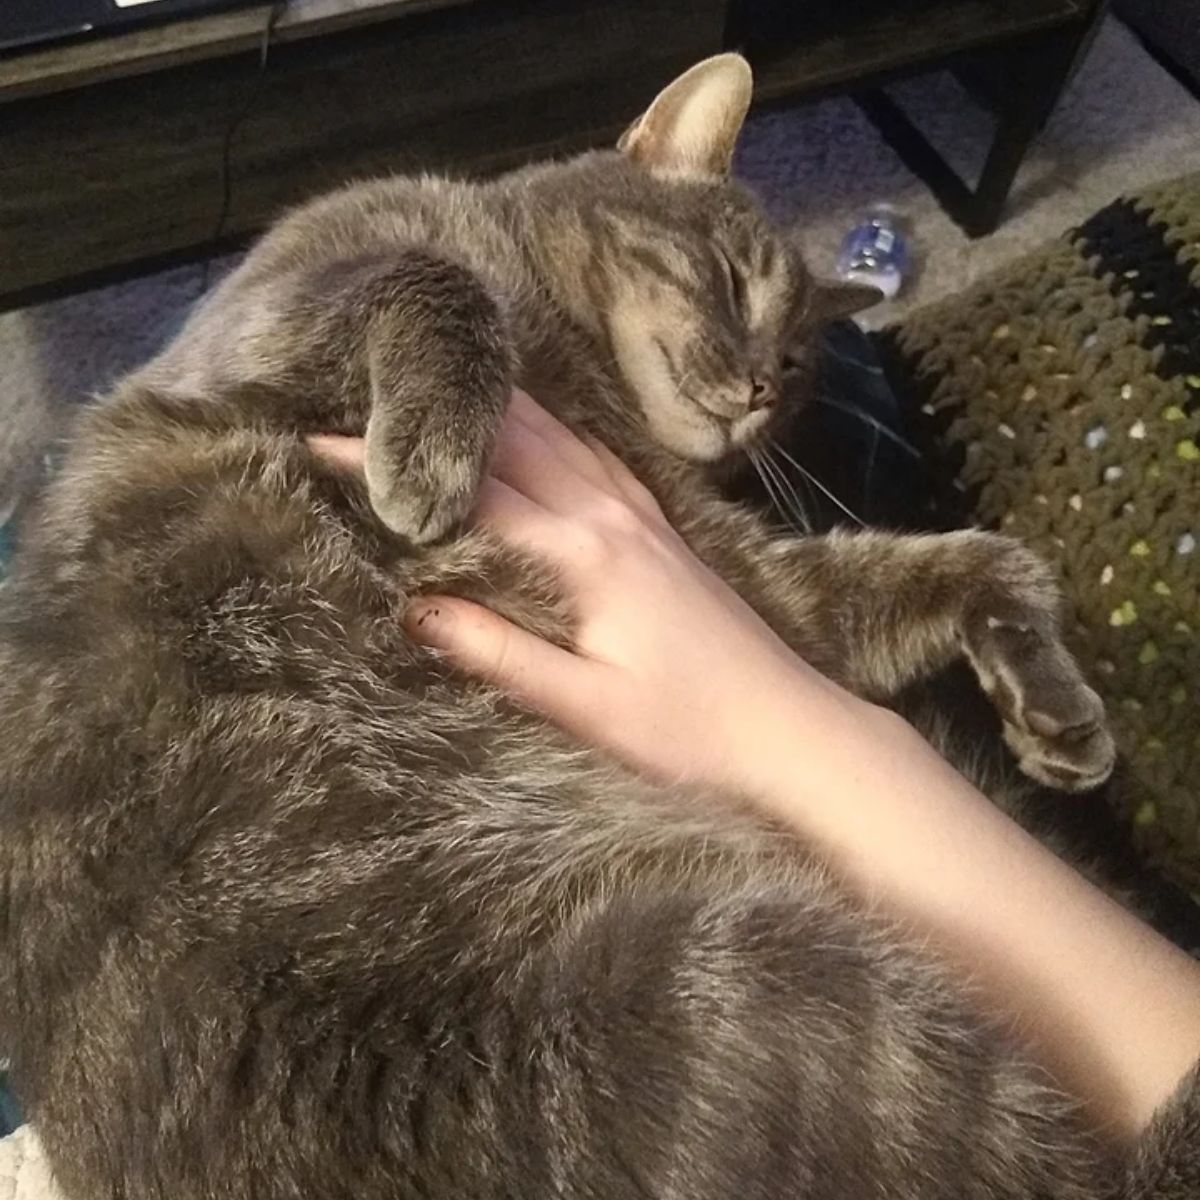 cat getting belly rubs